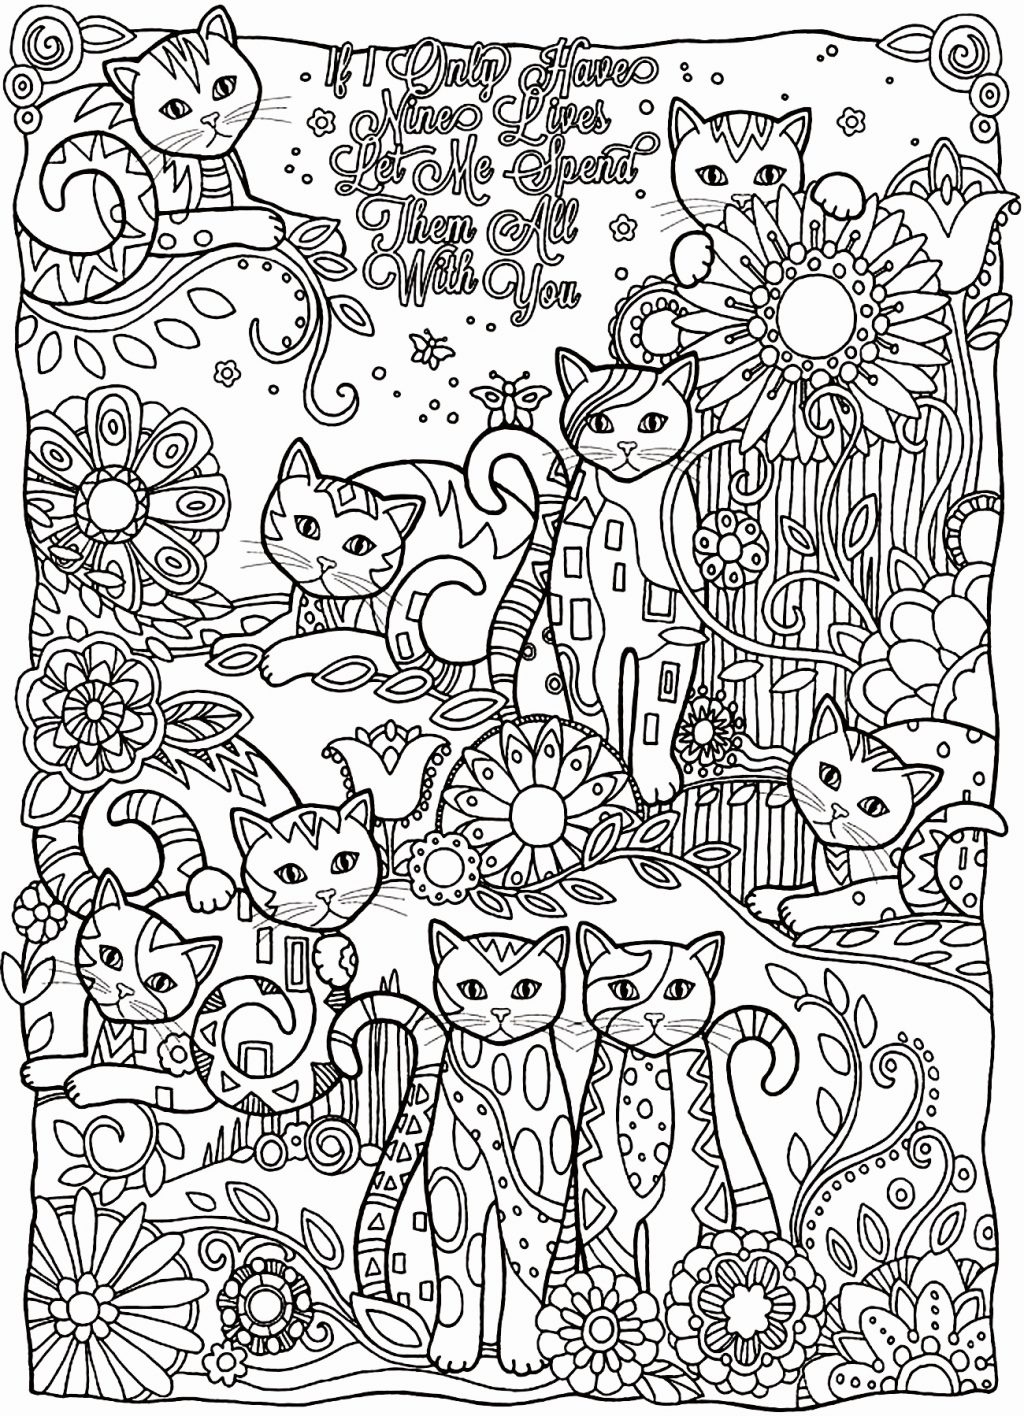 Coloring Pages ~ Coloring Pages Freeble Book Extraordinary Adult - Free Printable Coloring Pages For Adults Pdf